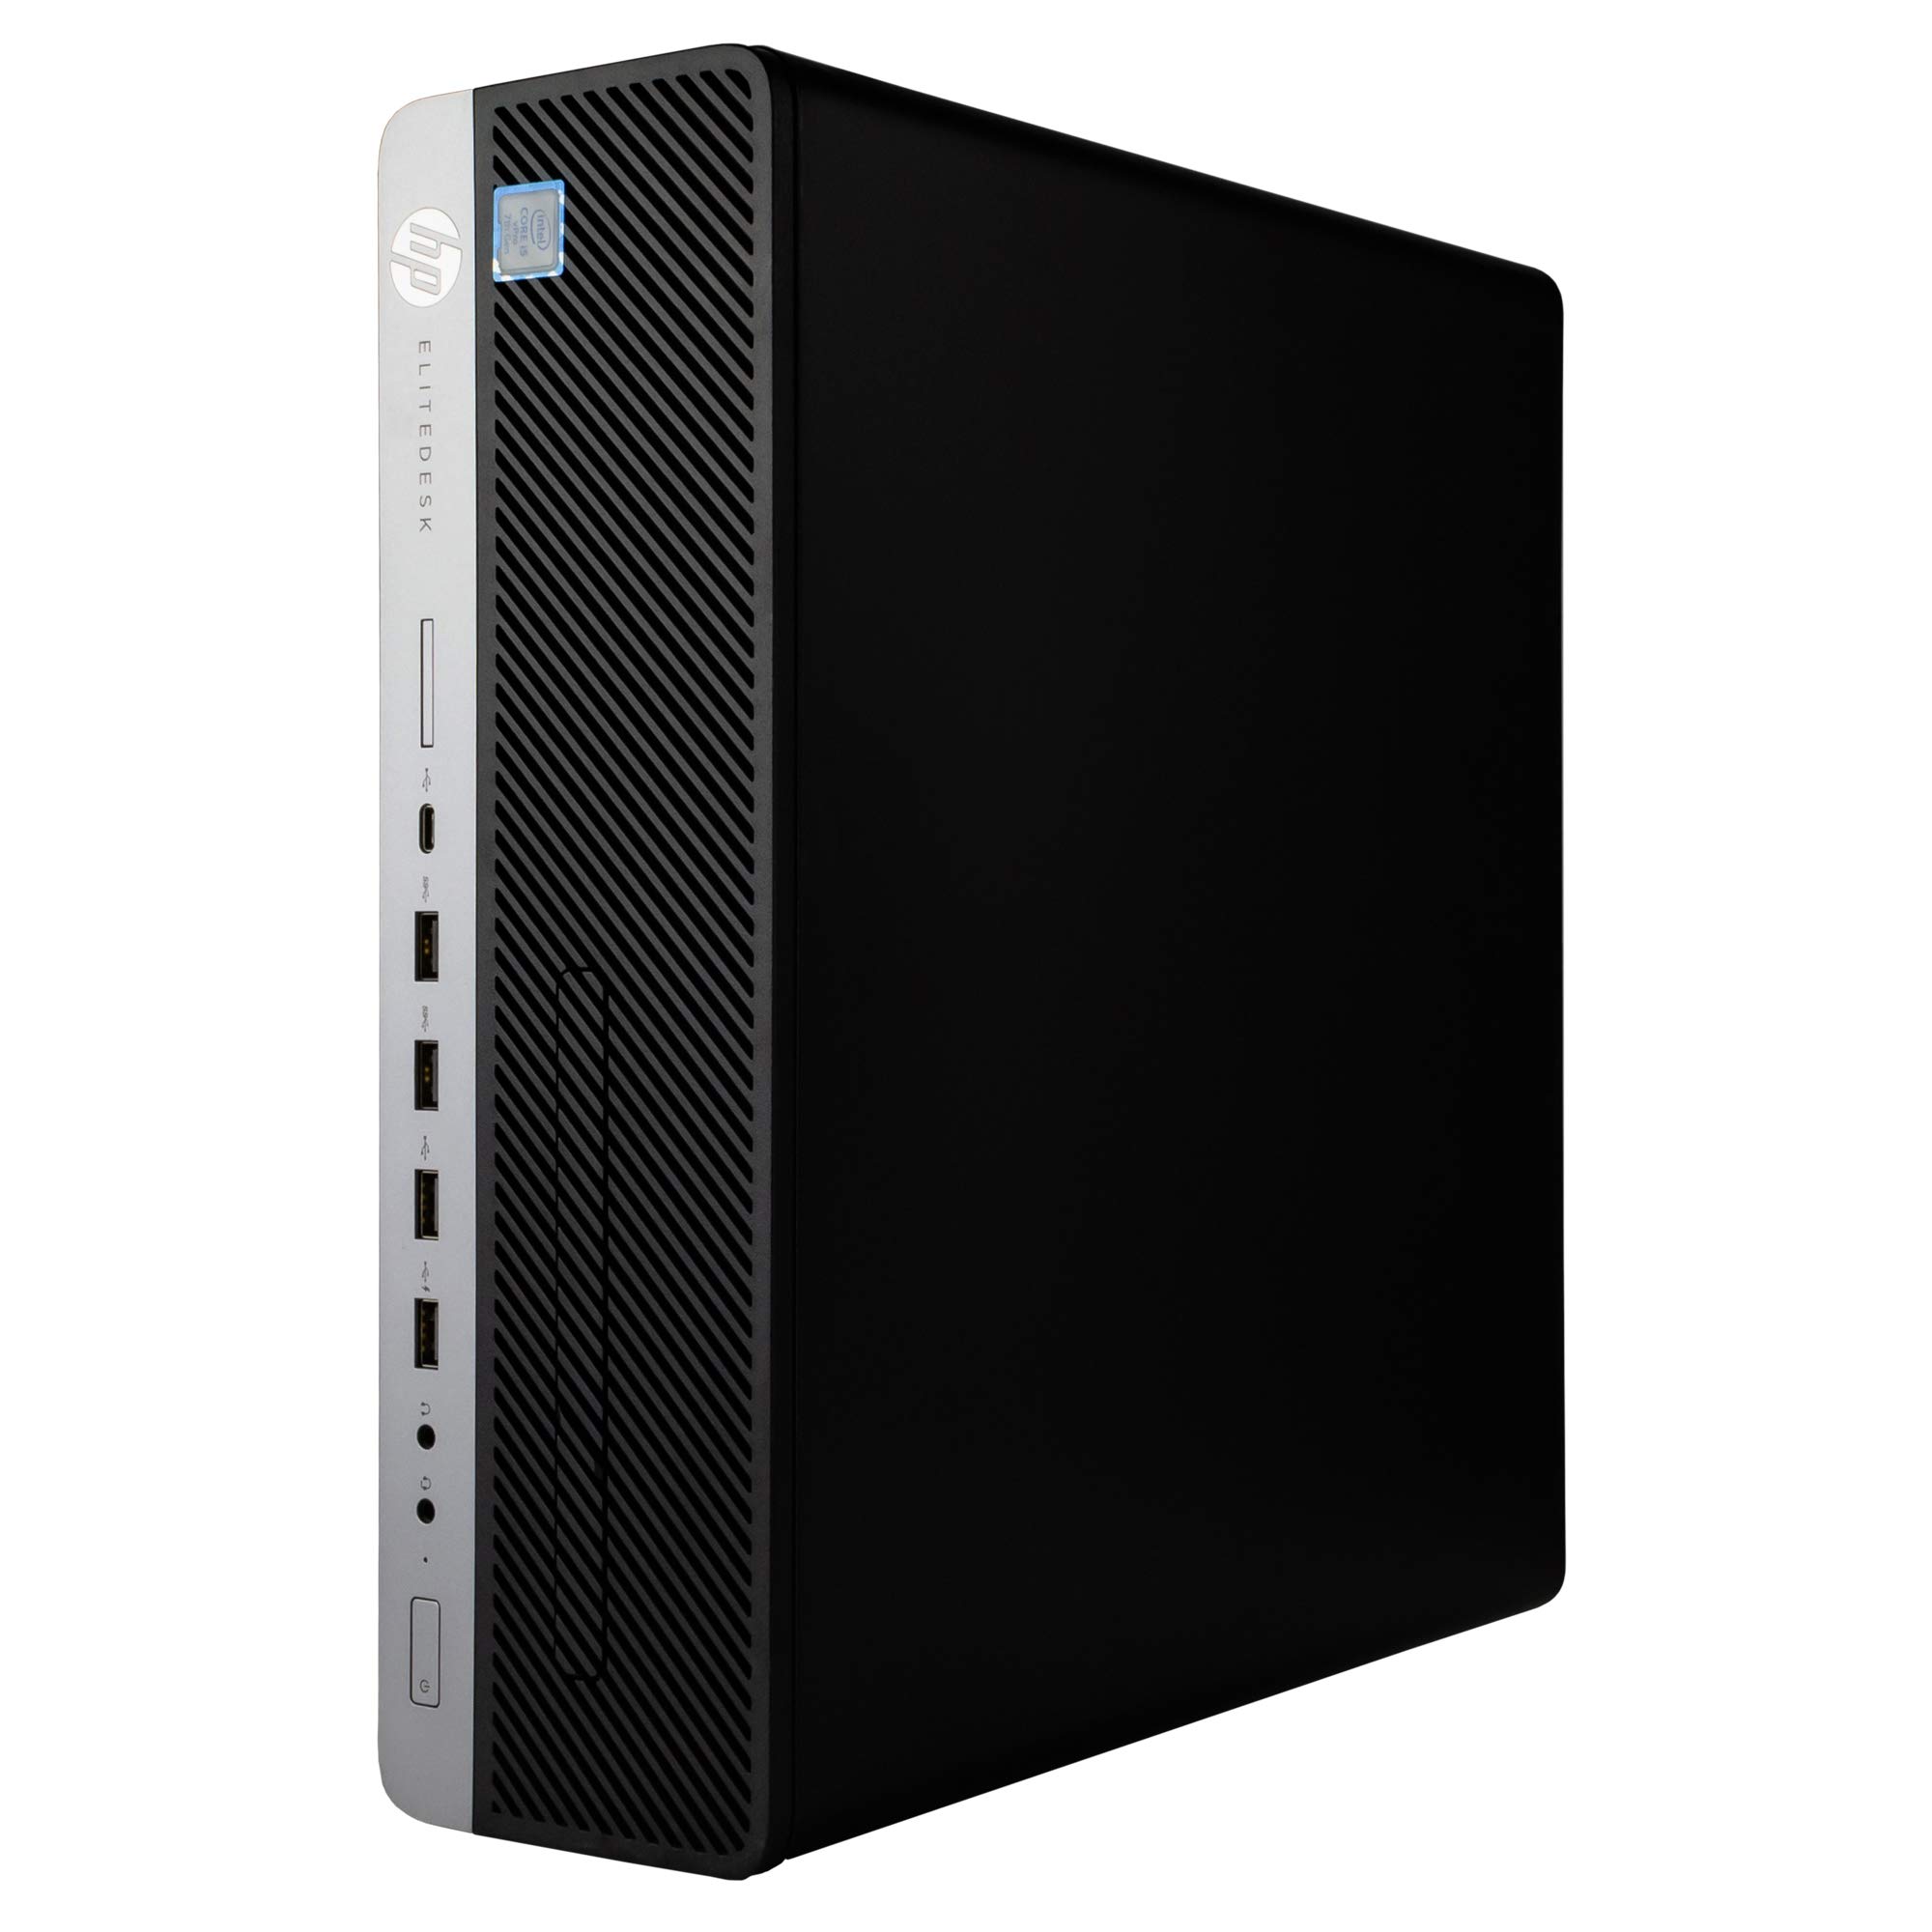 HP ProDesk 7th Generation Desktop Computer | Quad Core Intel i5 (3.2) | 32GB DDR4 RAM | 1TB SSD Solid State | Windows 10 Professional | Home or Office PC (Renewed)